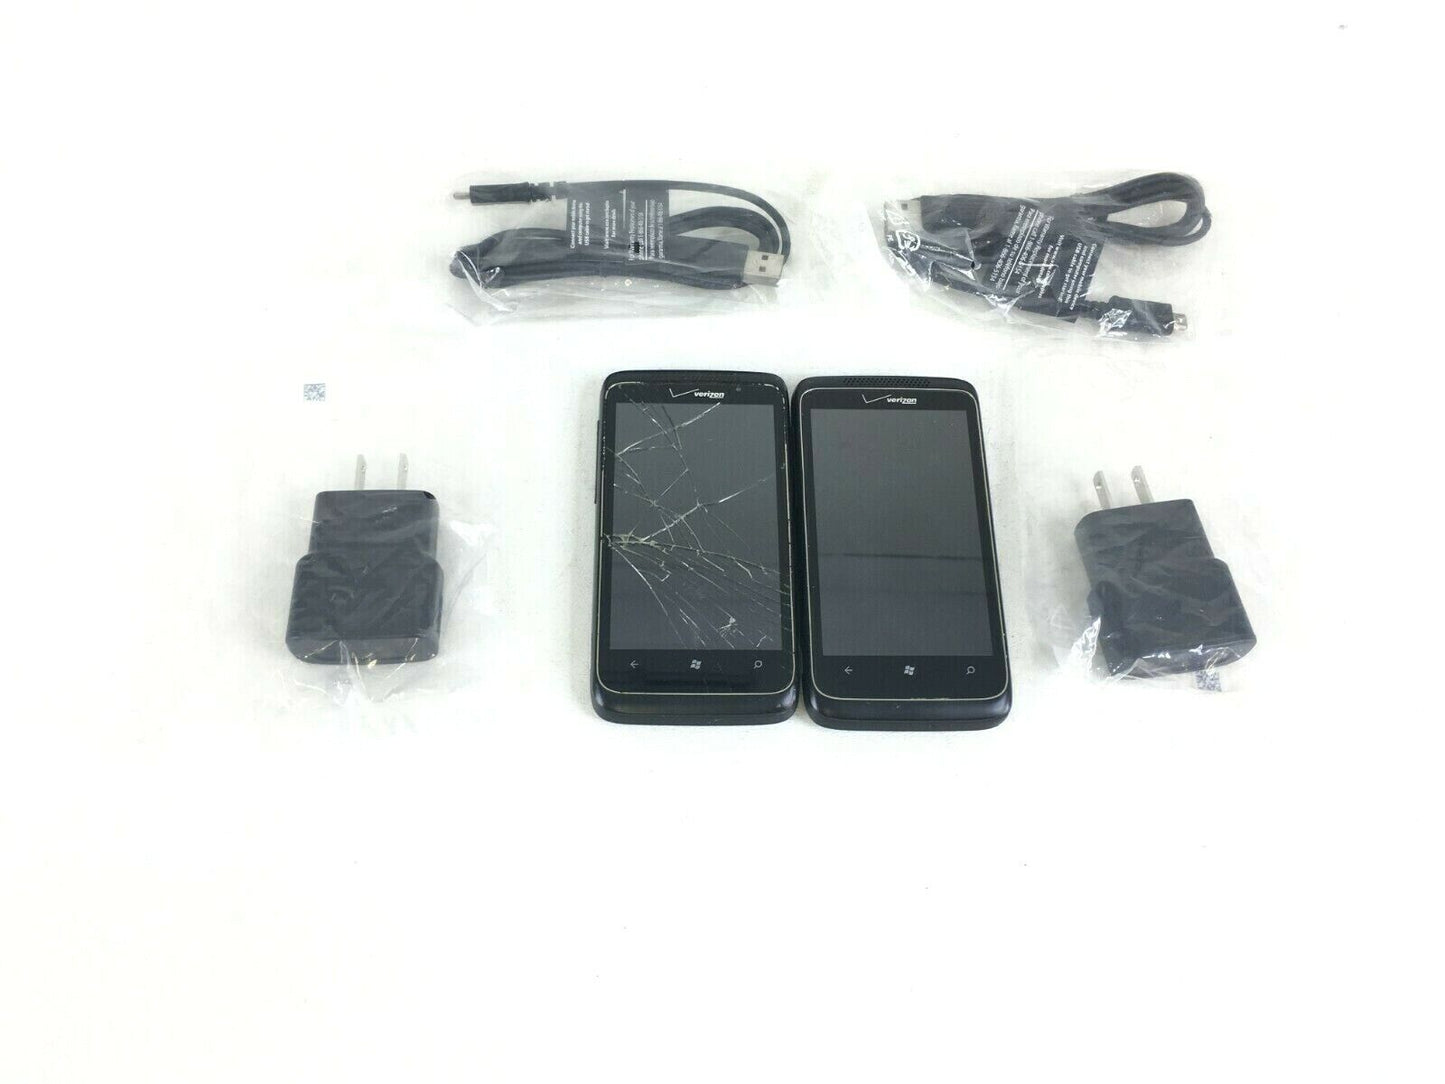 LOT OF 2 HTC Trophy 7- Black (Verizon) Windows Smartphone Cell Phone FOR PARTS